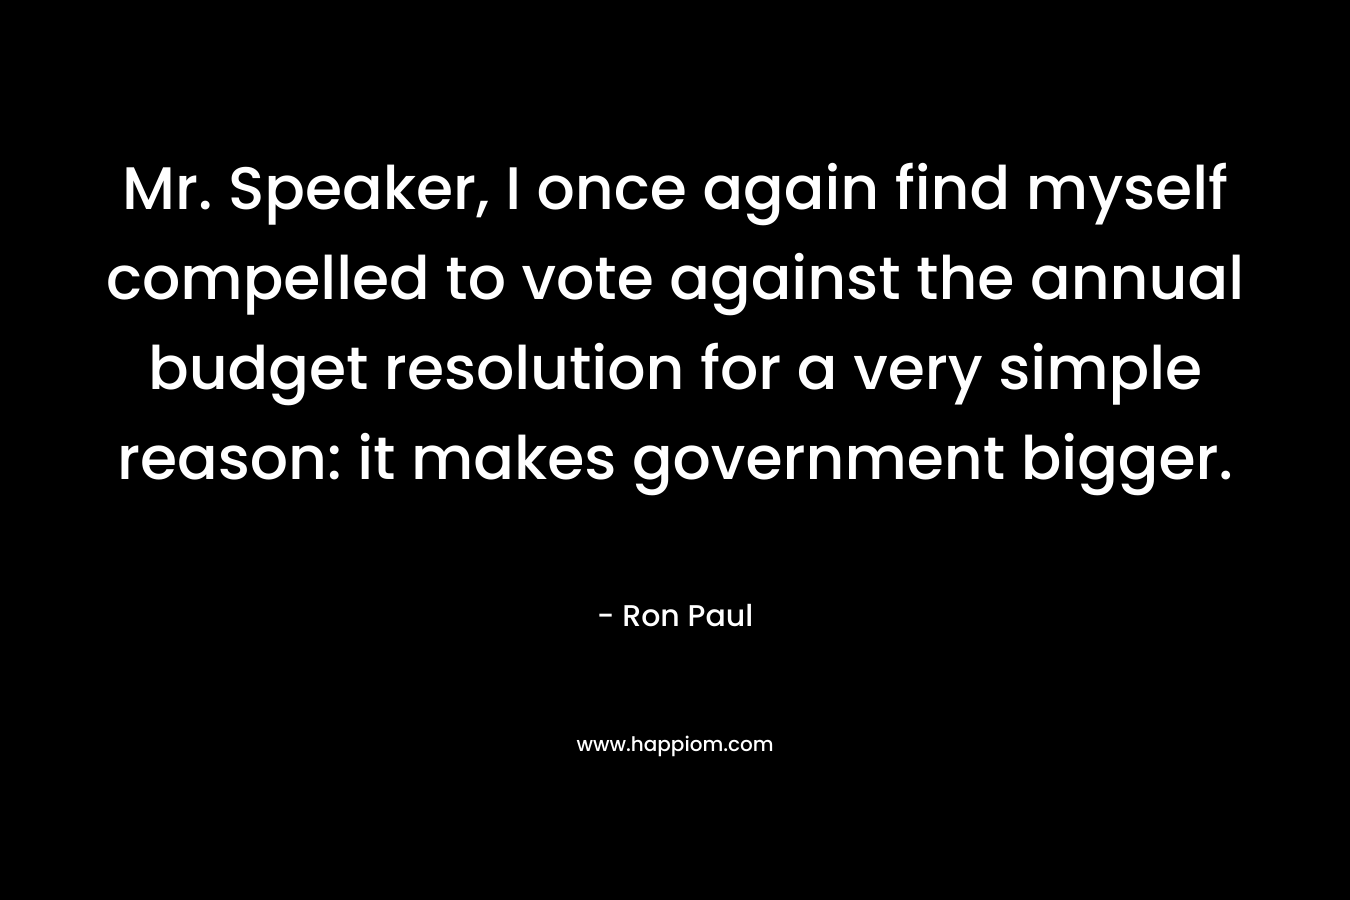 Mr. Speaker, I once again find myself compelled to vote against the annual budget resolution for a very simple reason: it makes government bigger.